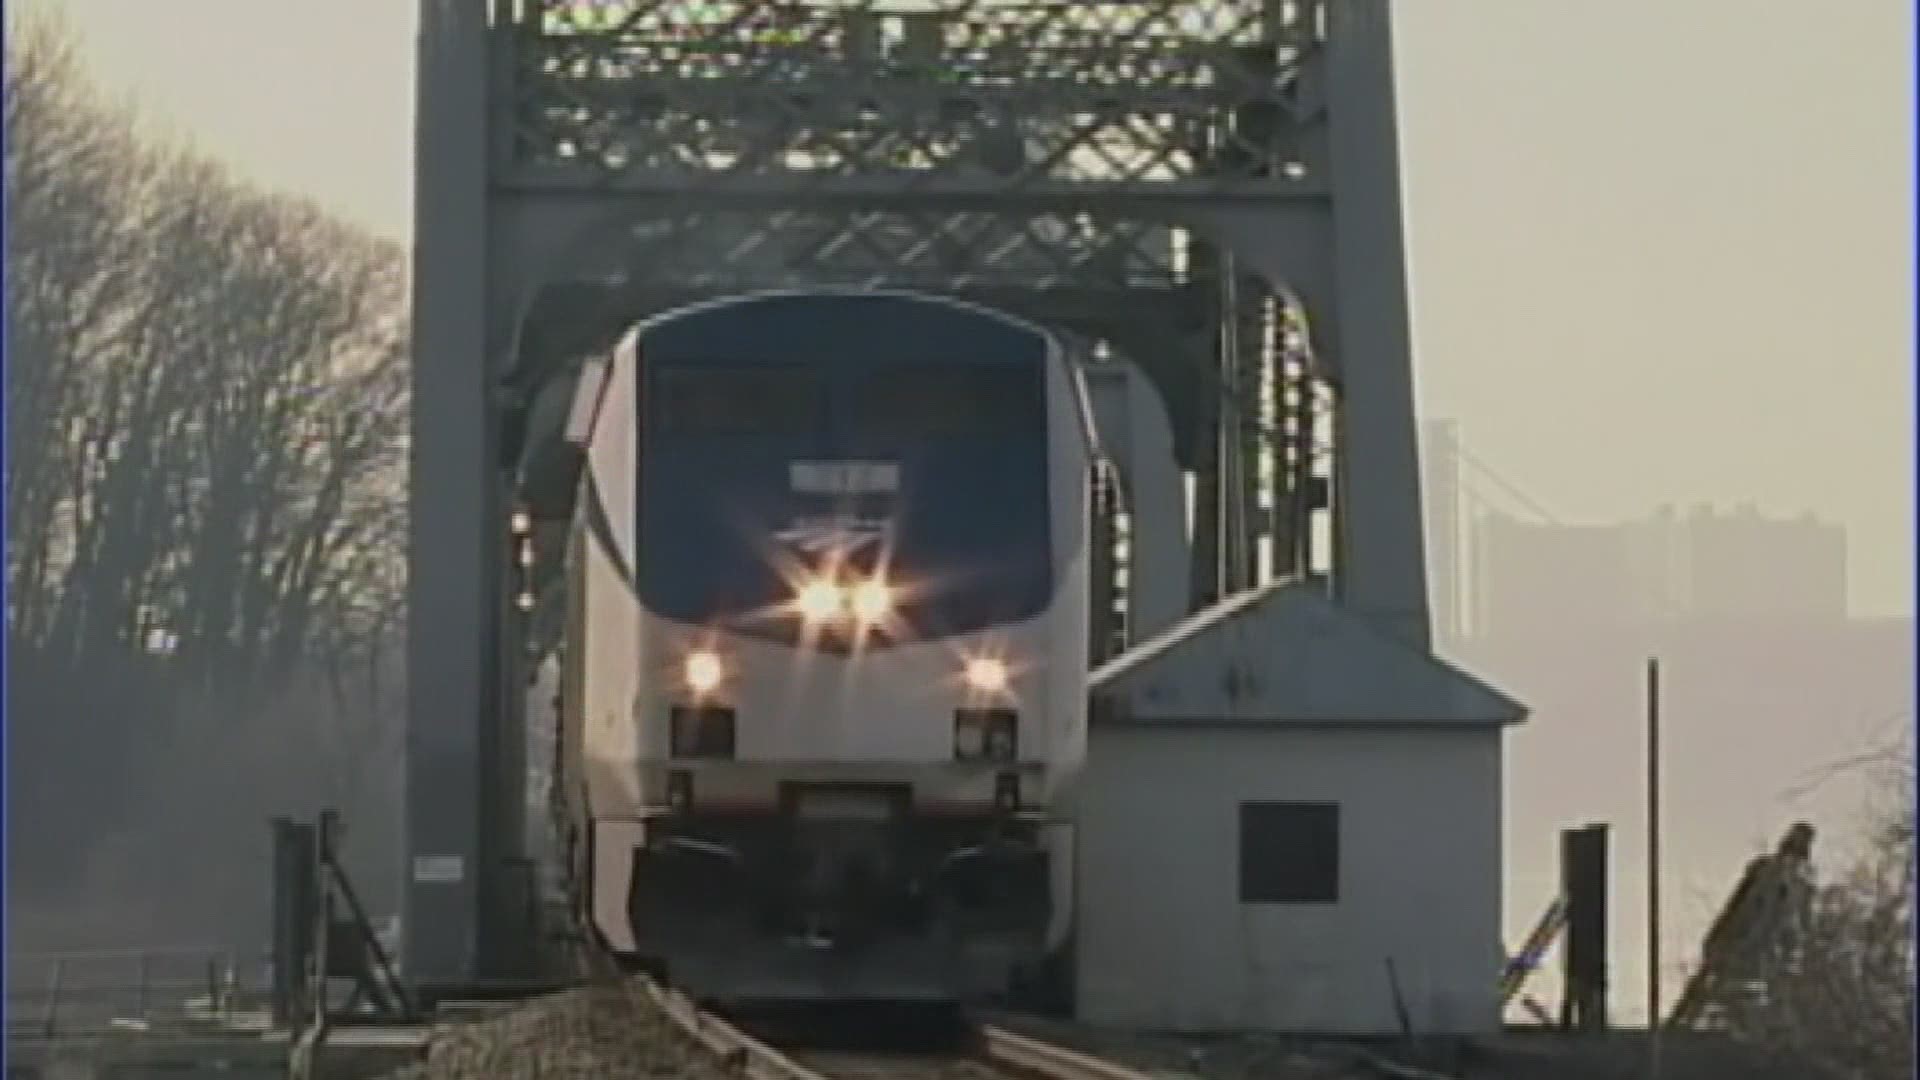 Amtrak leaders announced plans to try and bring more passenger rail service in Ohio to connect Cleveland, Cincinnati, Columbus and Dayton.